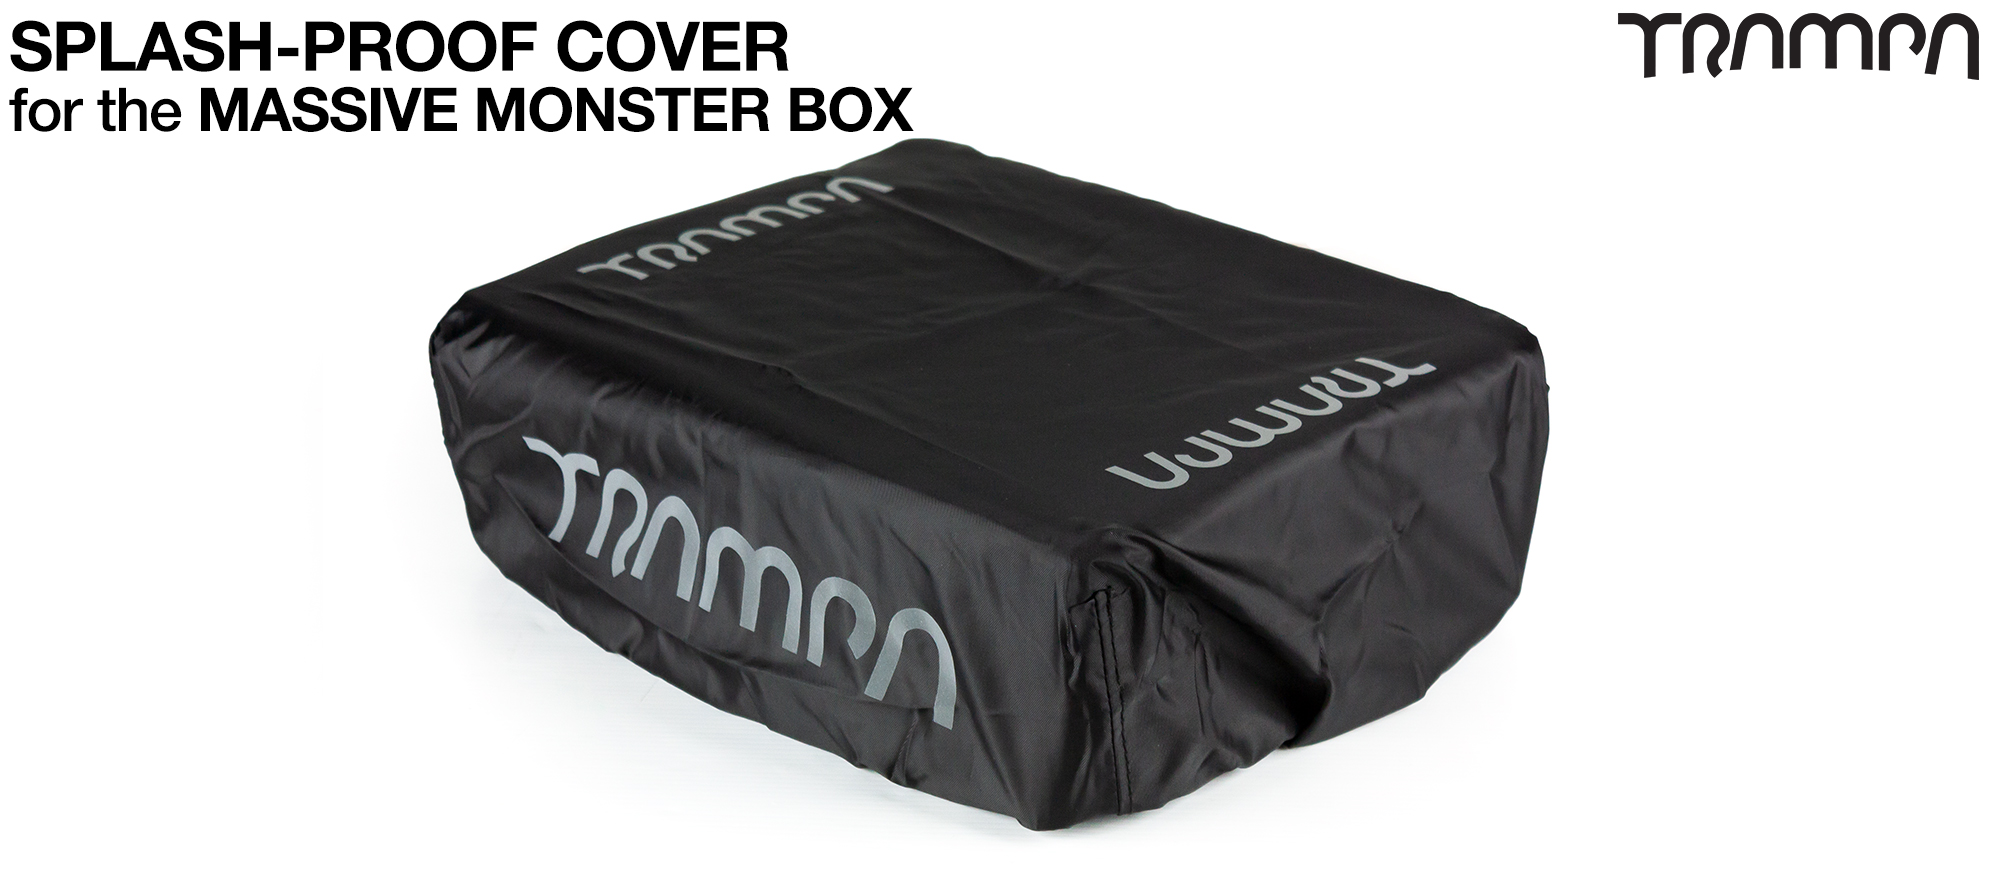 MASSIVE MONSTER Box - Reflective light weight whilst Splash Proof Top Cover MASSIVE 